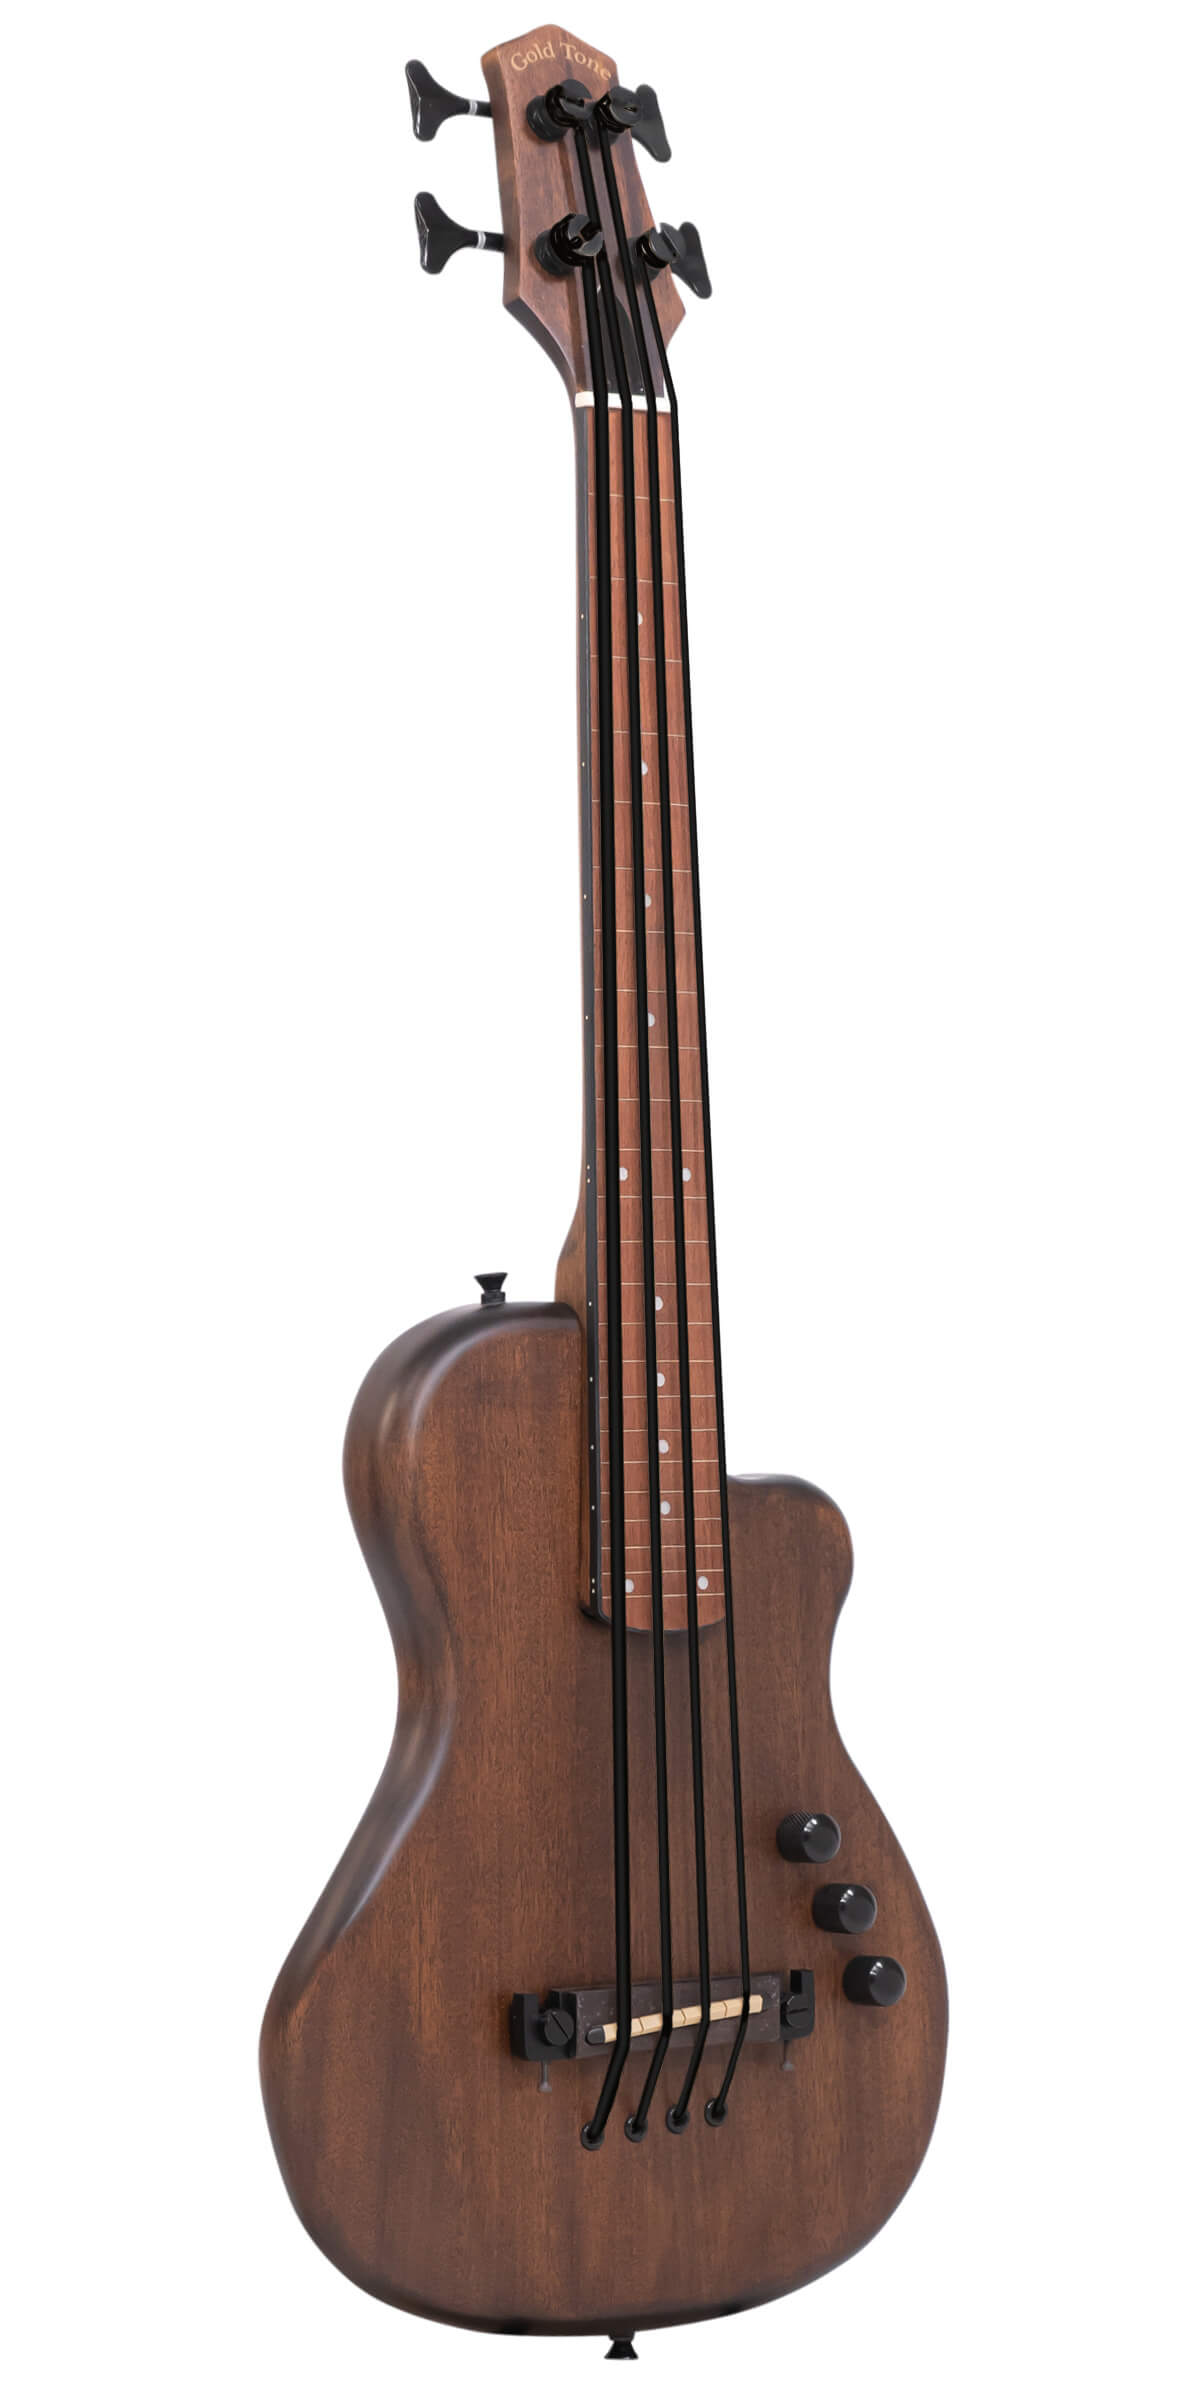 ME-Bass: 23-Inch Scale Electric MicroBass | Gold Tone Folk Instruments